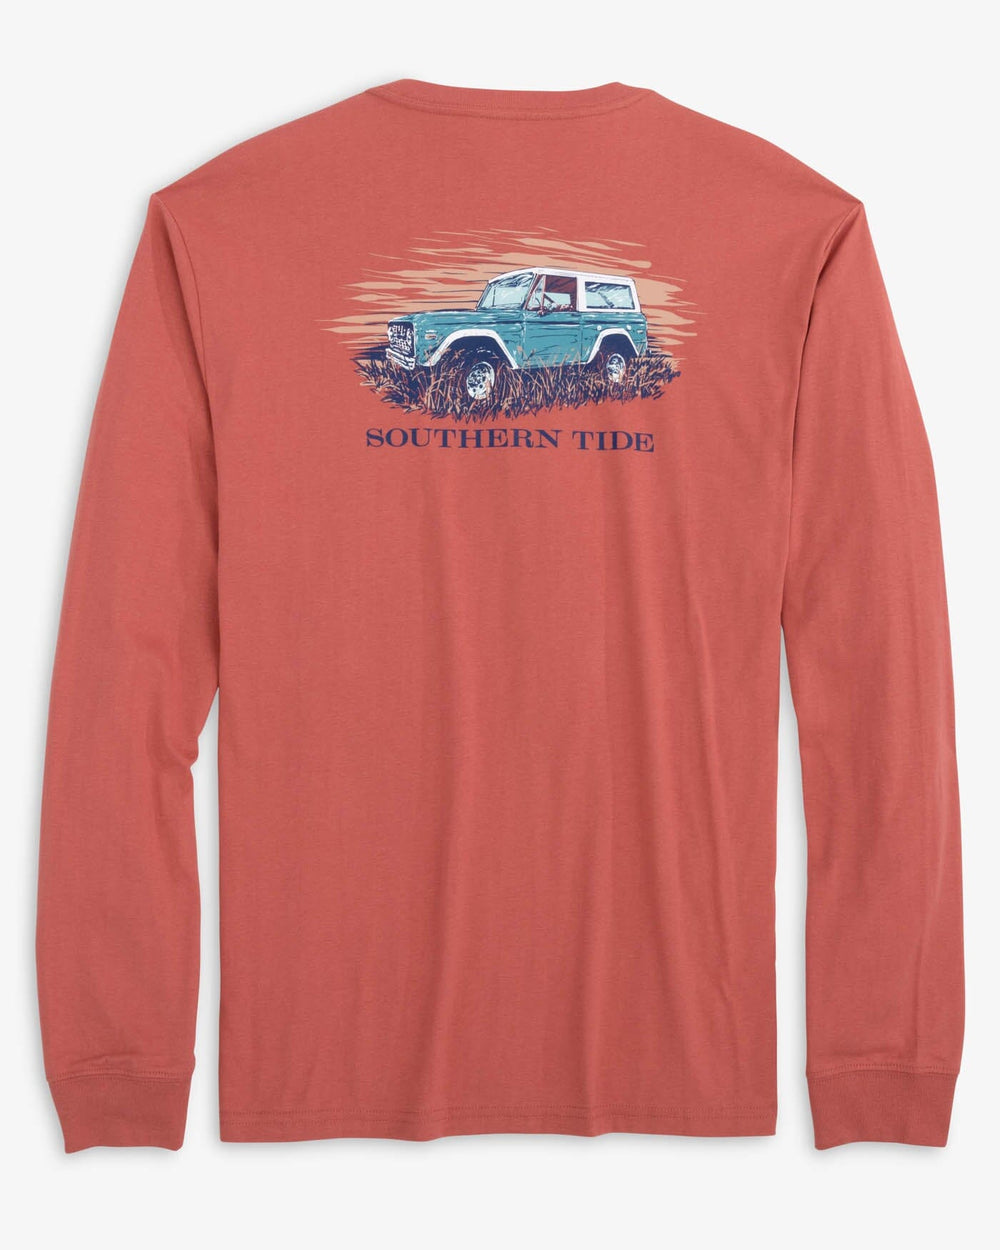 The back view of the Southern Tide On Board For Off Roads T-Shirt by Southern Tide - Dusty Coral